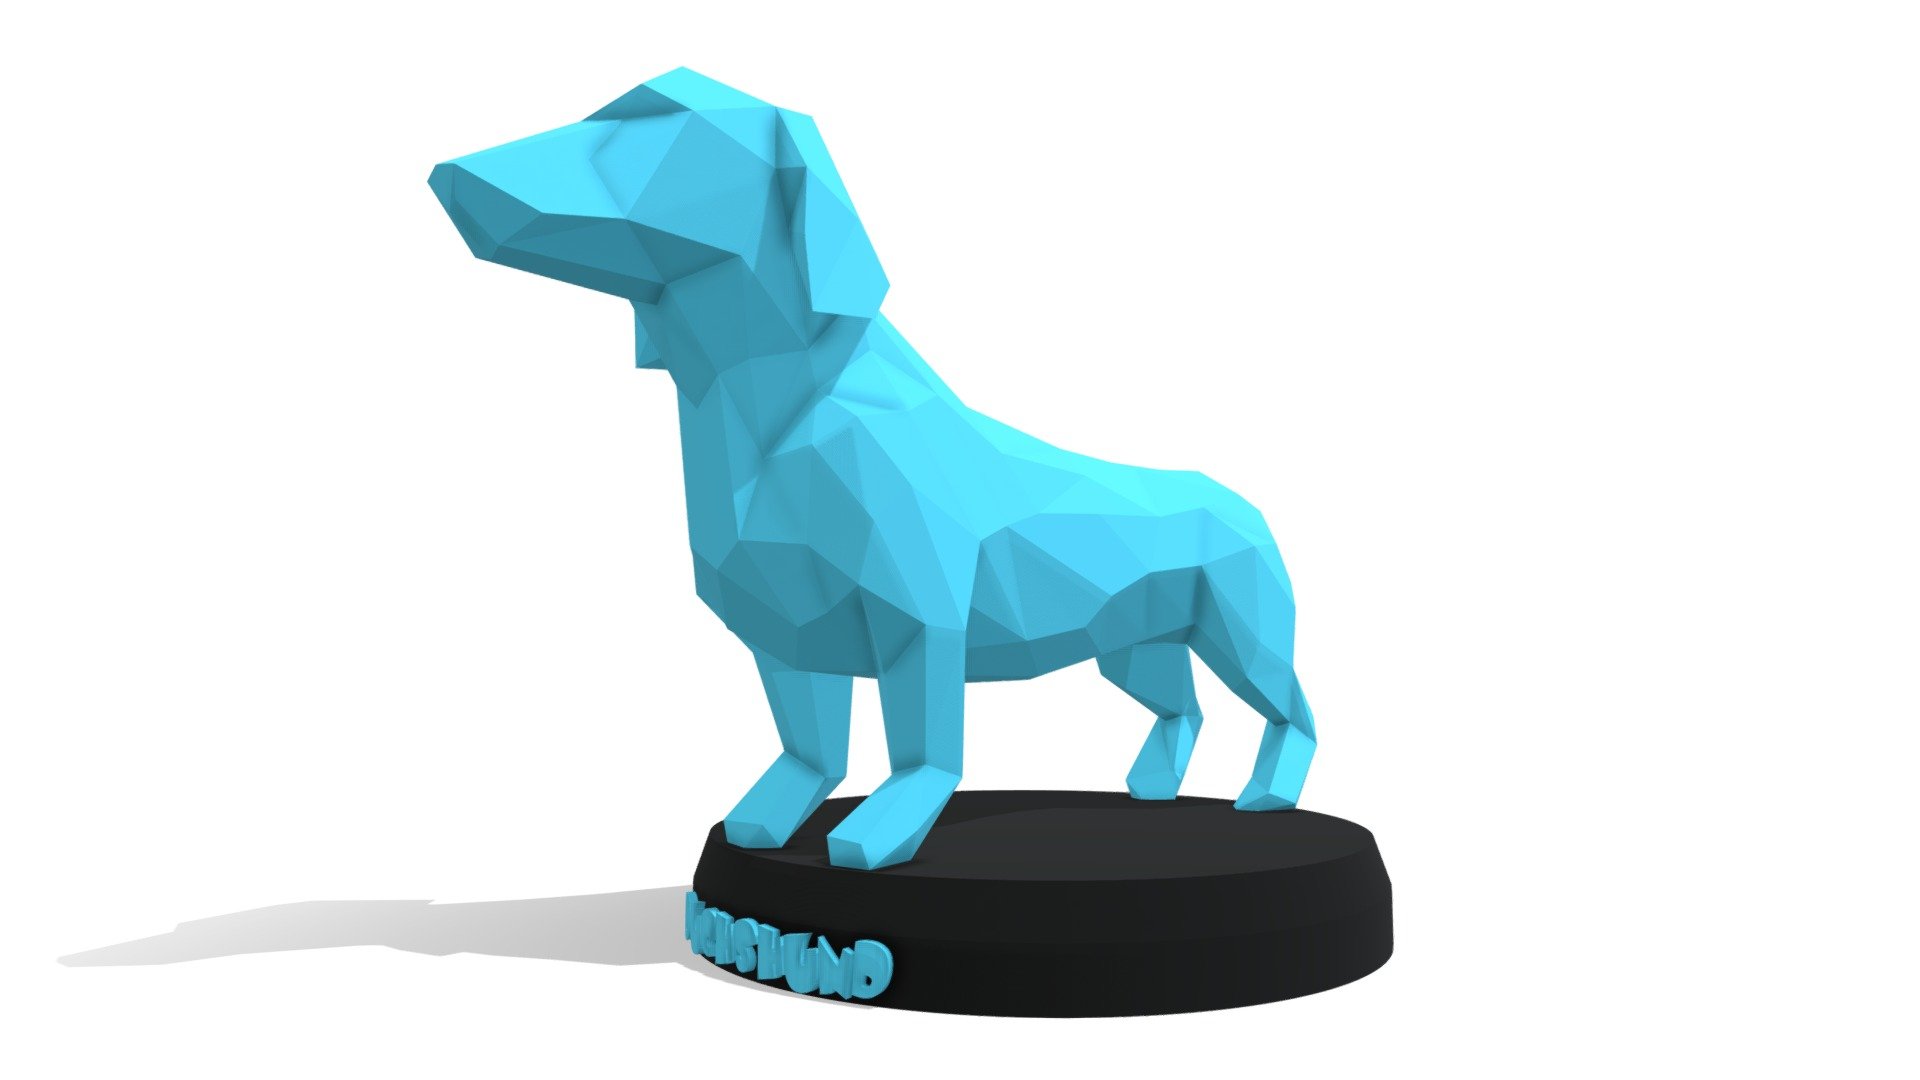 Polygonal 3D Model with Parametric modeling with gold material, make it recommend for :




Basic modeling 

Rigging 

sculpting 

Become Statue

Decorate

3D Print File

Toy

Have fun  :) - Poly Duchshund Dog - Buy Royalty Free 3D model by Puppy3D 3d model